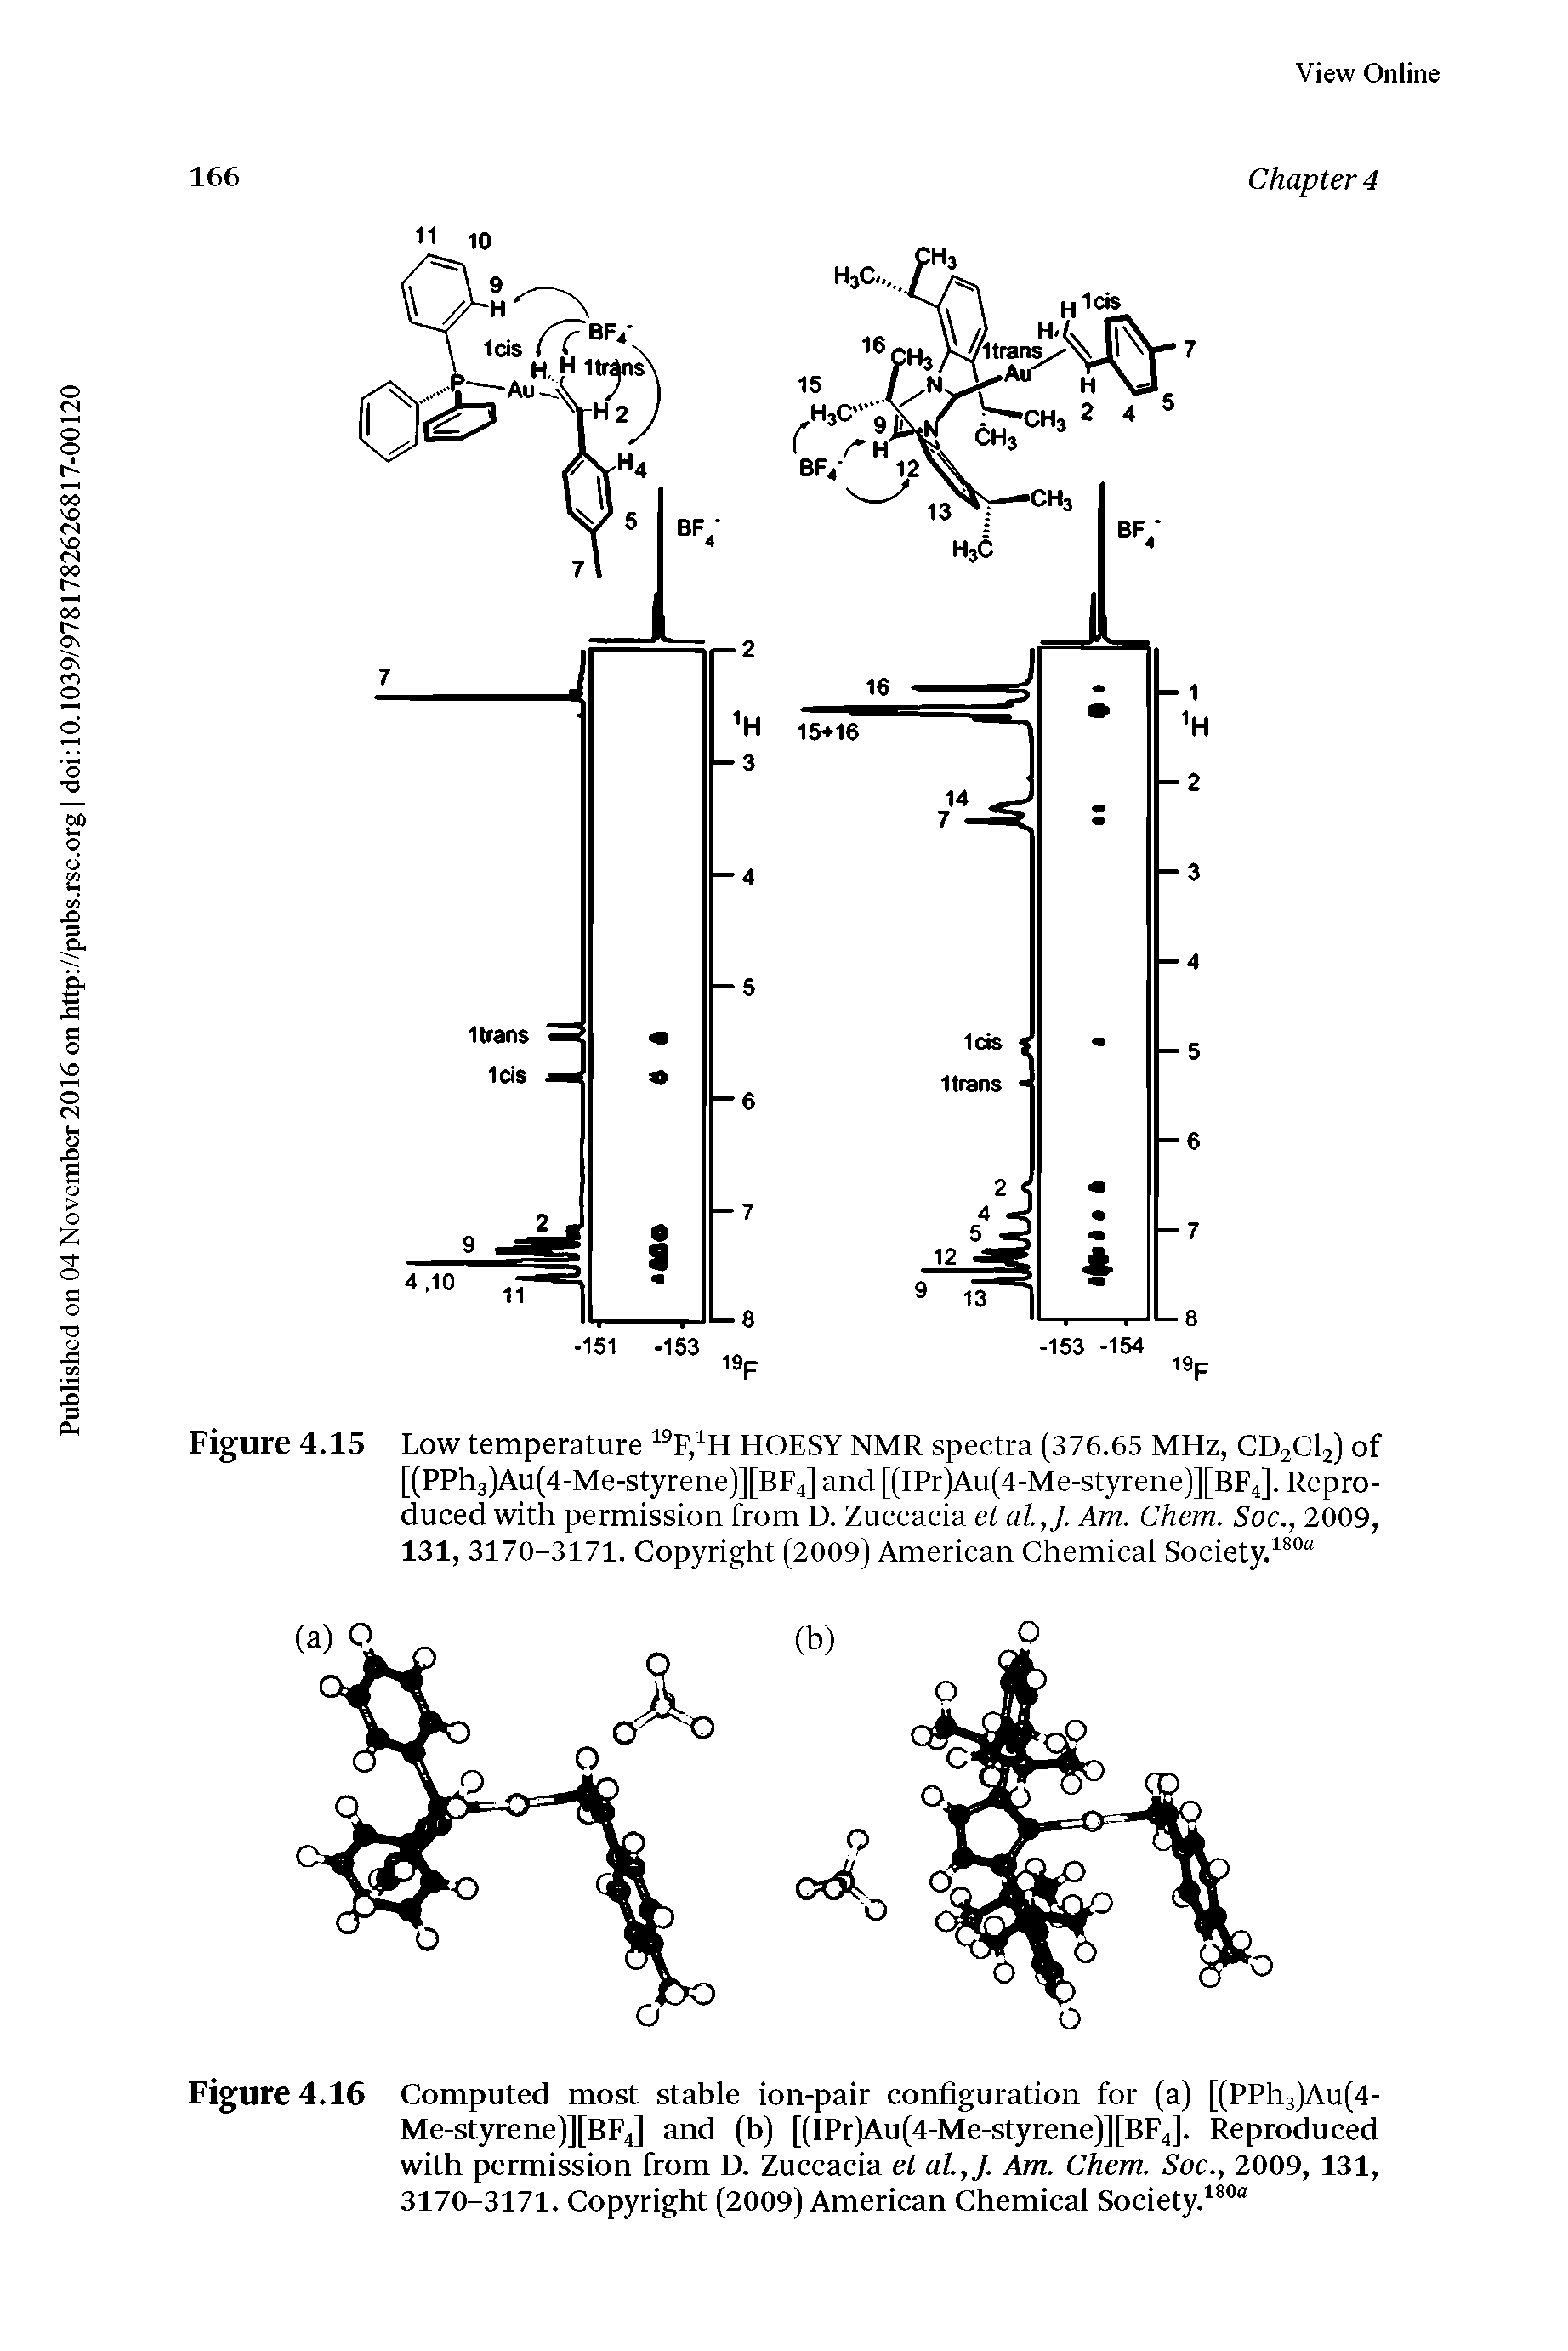 Figure 4.16 Computed most stable ion-pair configuration for (a) [(PPh3)Au(4-Me-styrene)][BFj and (b) [(IPr)Au(4-Me-styrene)][BF4]. Reproduced with permission from D. Zuccacia et Am. Chem. Soc., 2009,131, 3170-3171. Copyright (2009) American Chemical Society. "...